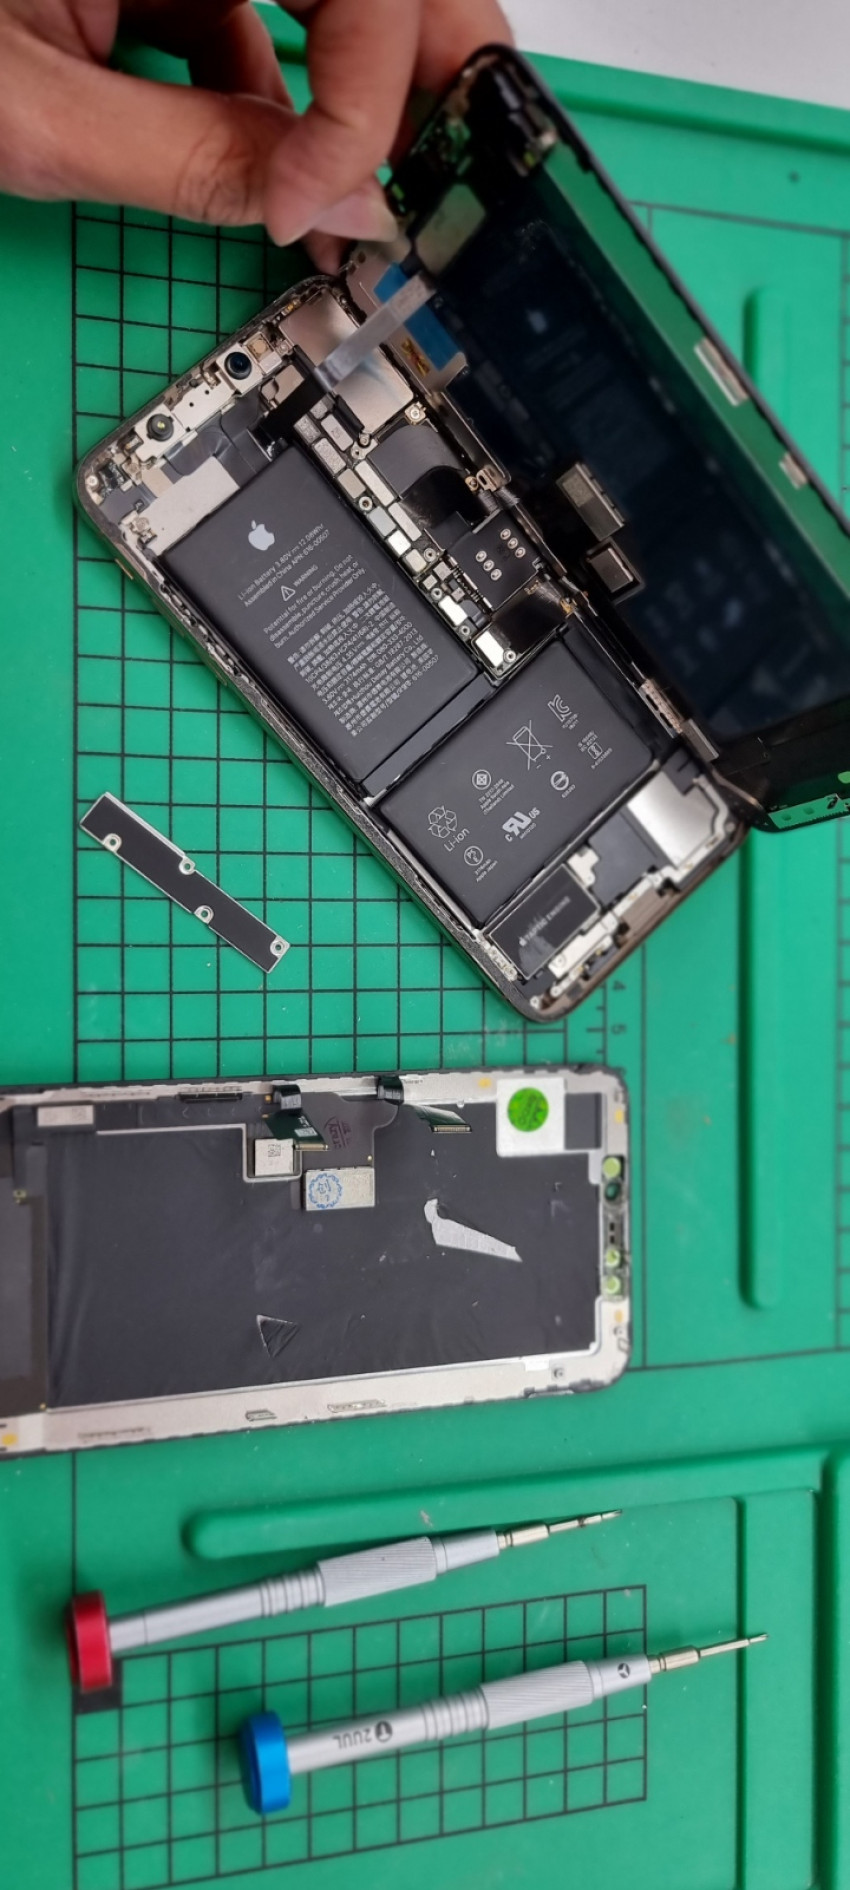 Quality Matters: Reliable iPhone Repair Services in Box Hill & Schofields.